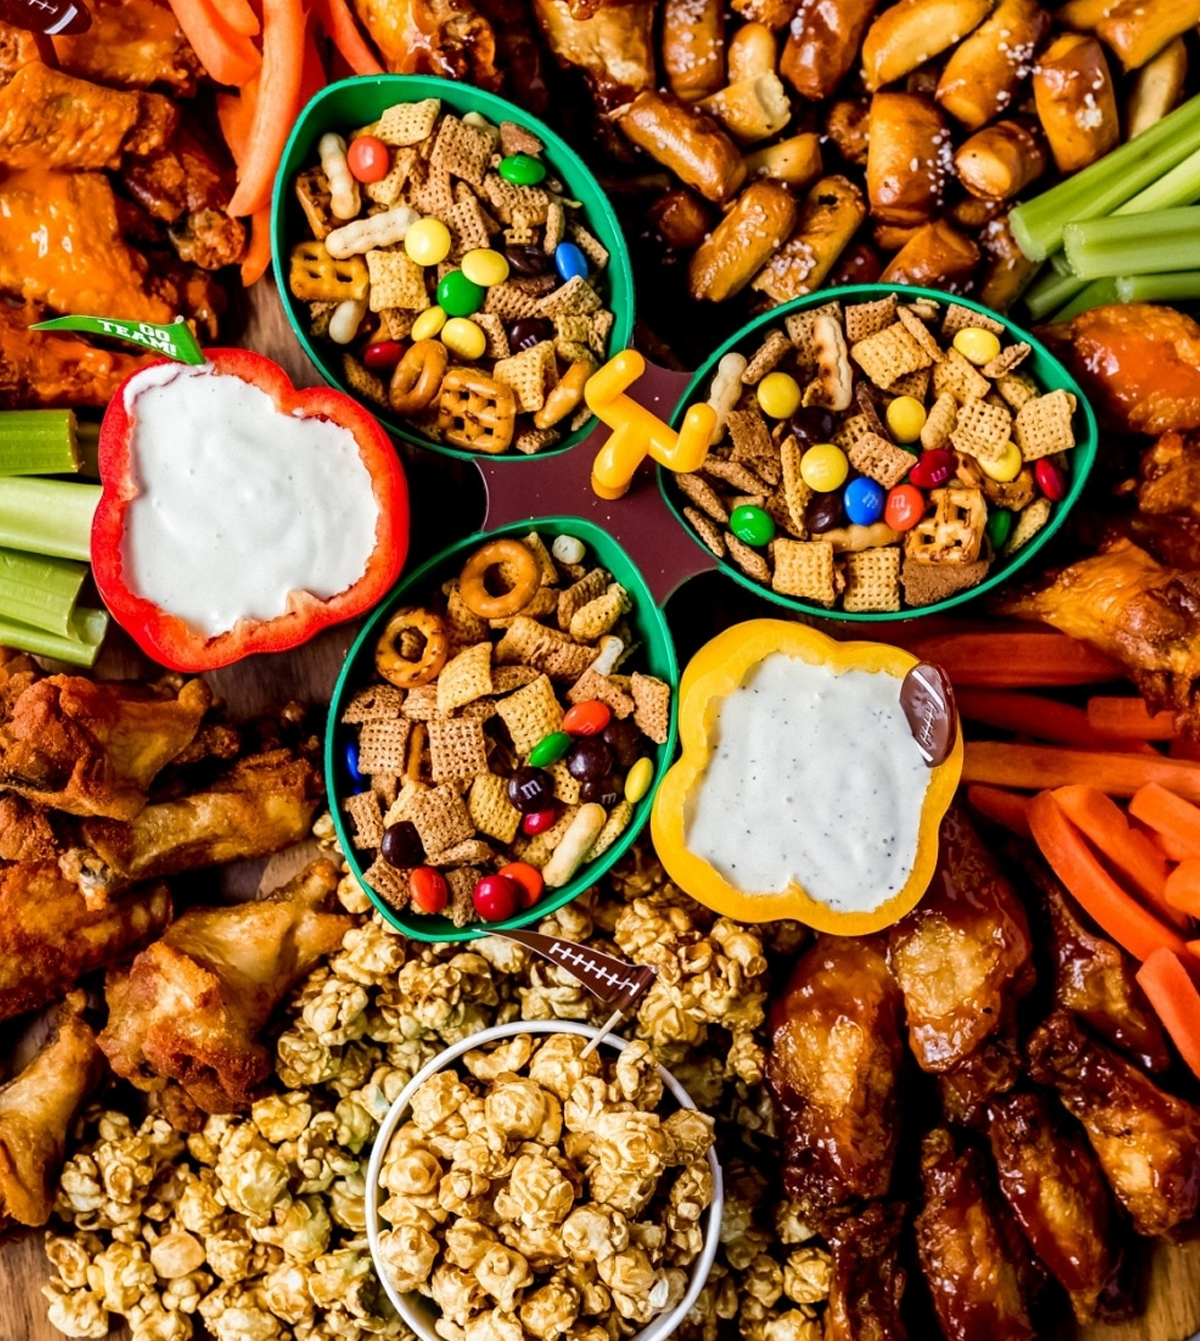 Buffalo wings, chex mix, veggies, and dip fill Wanderlust and Wellness game day board.